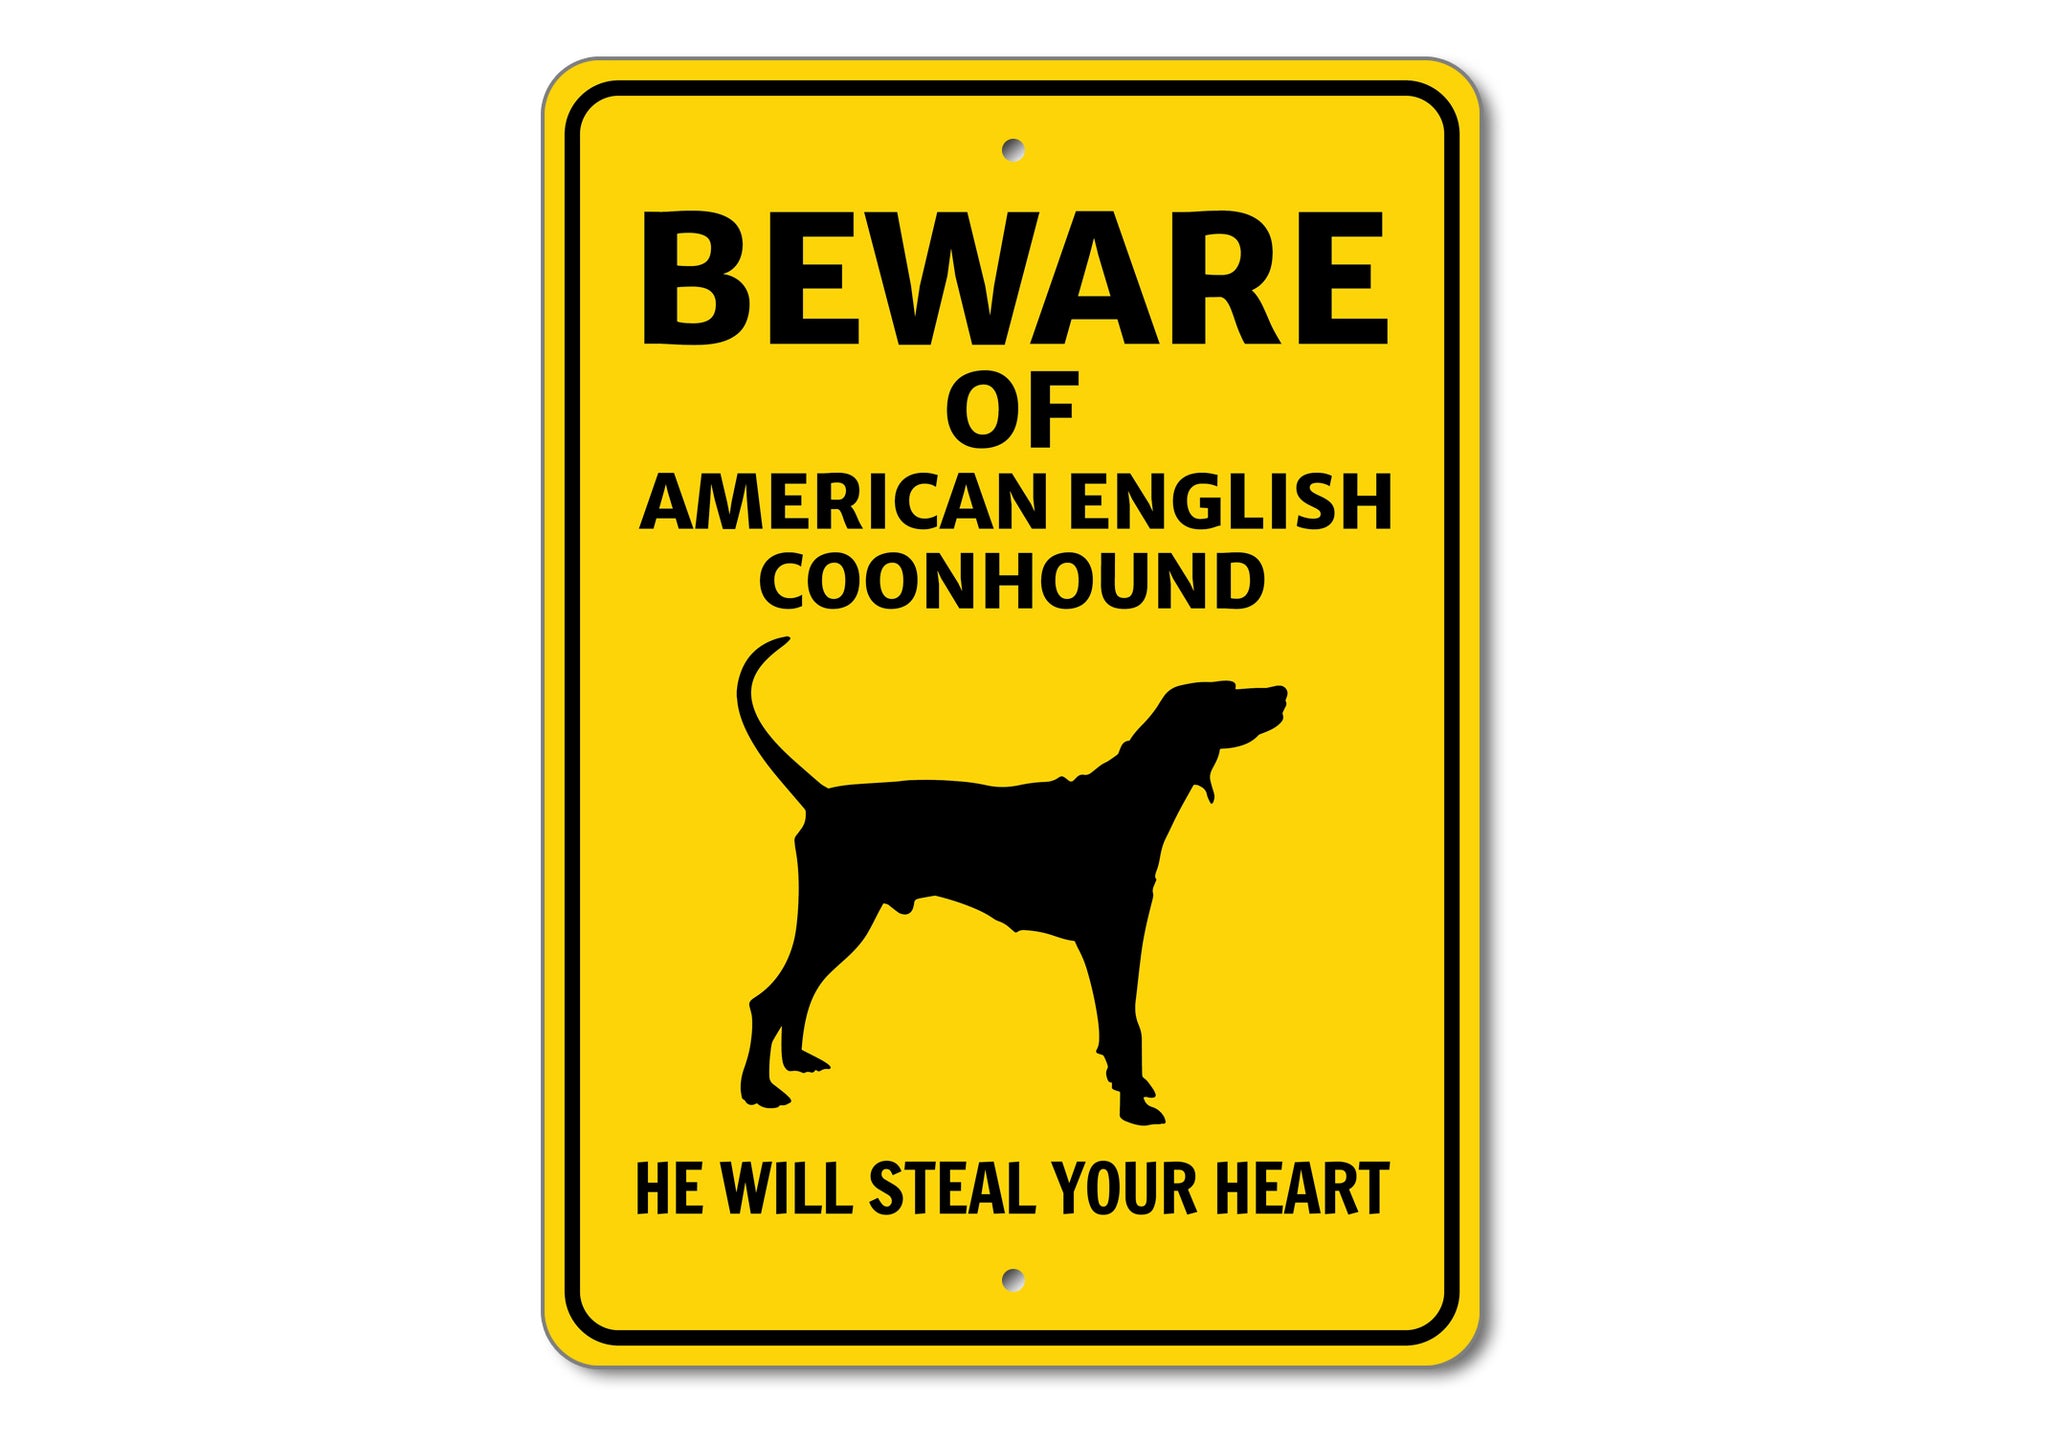 Beware He Will Steal Your Heart K9 Sign - Dog Names Starting with "A"